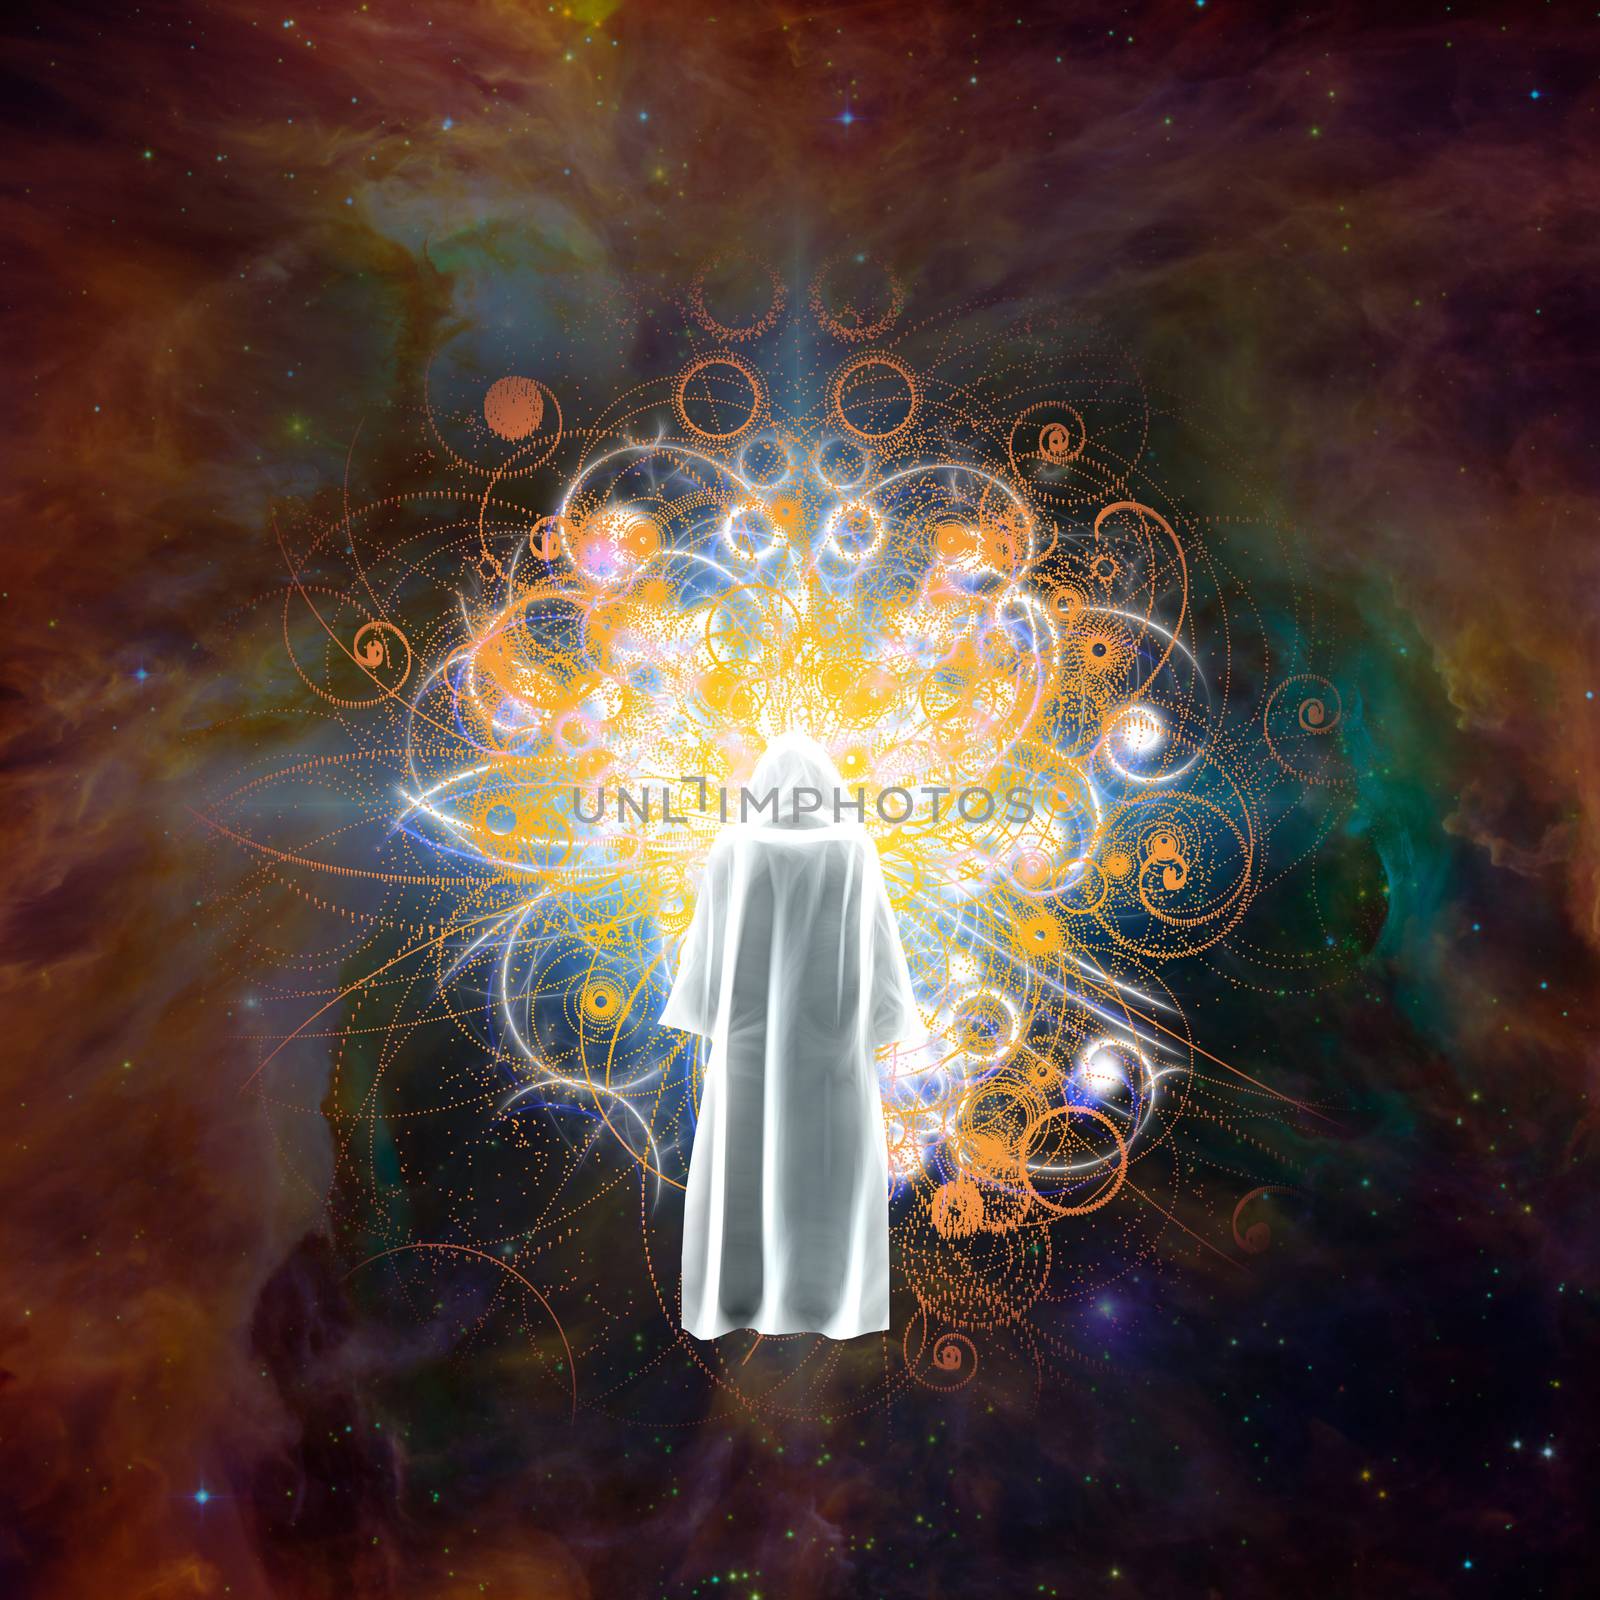 Surreal digital art. Figure in white cloak stands before bright light in colorful universe.